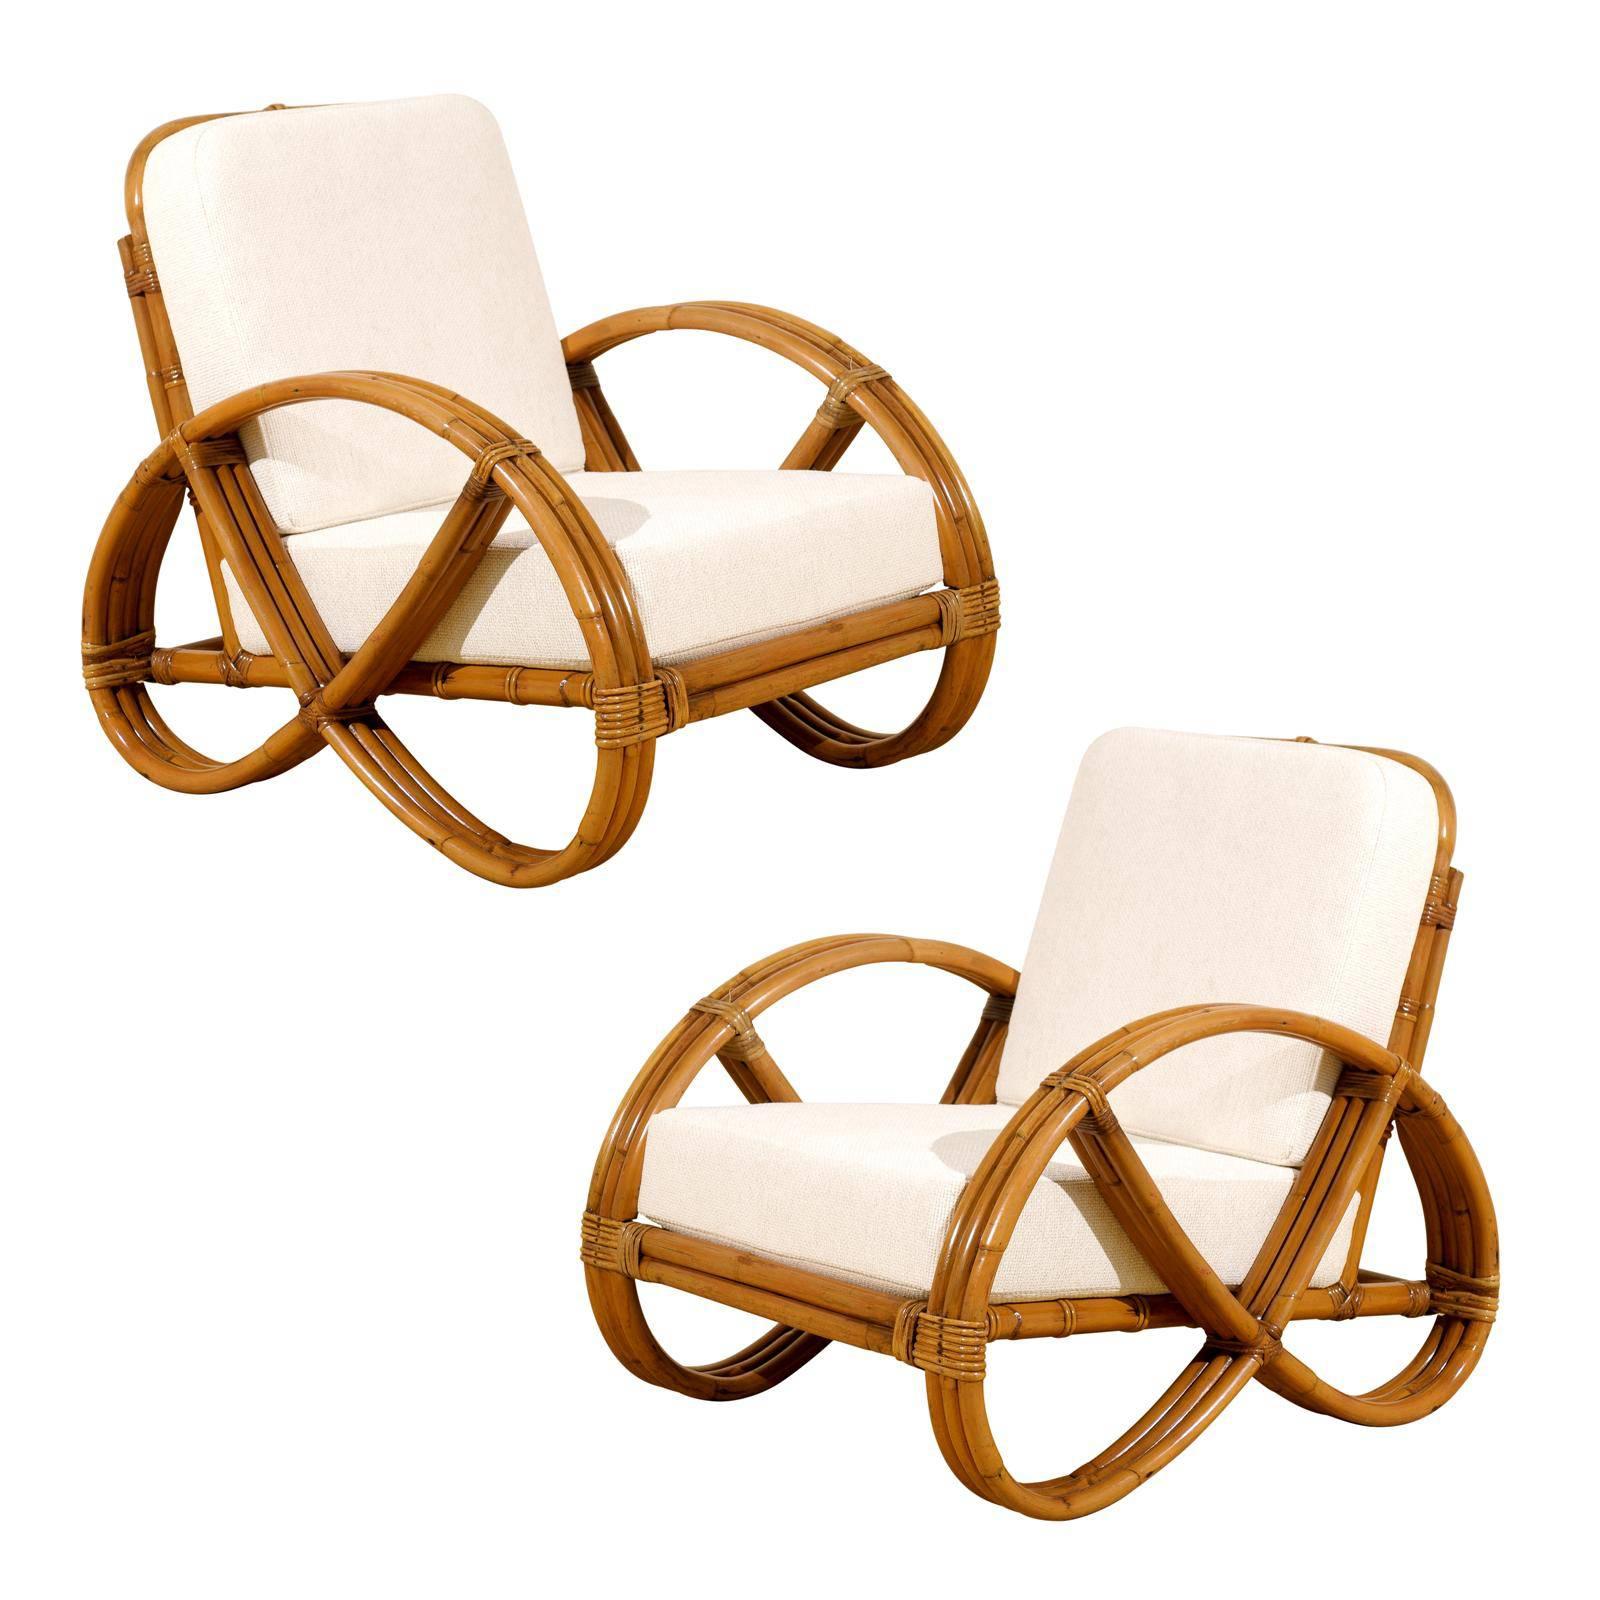 Stellar Restored Pair of Rattan Pretzel and Cane Loungers, circa 1940 For Sale